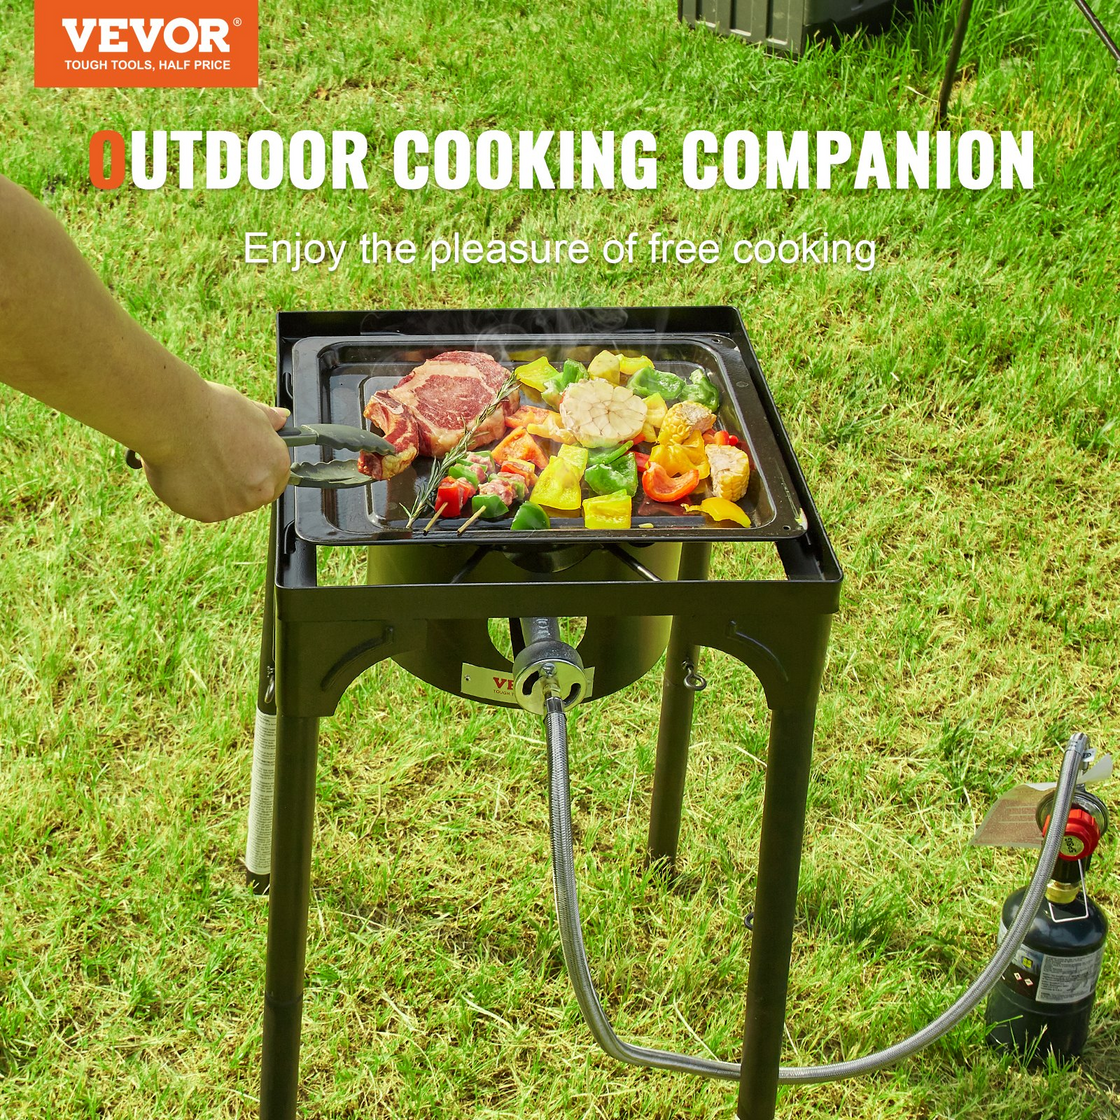 VEVOR Single Burner Outdoor Camping Stove - Heavy Duty Carbon Steel Gas Cooker